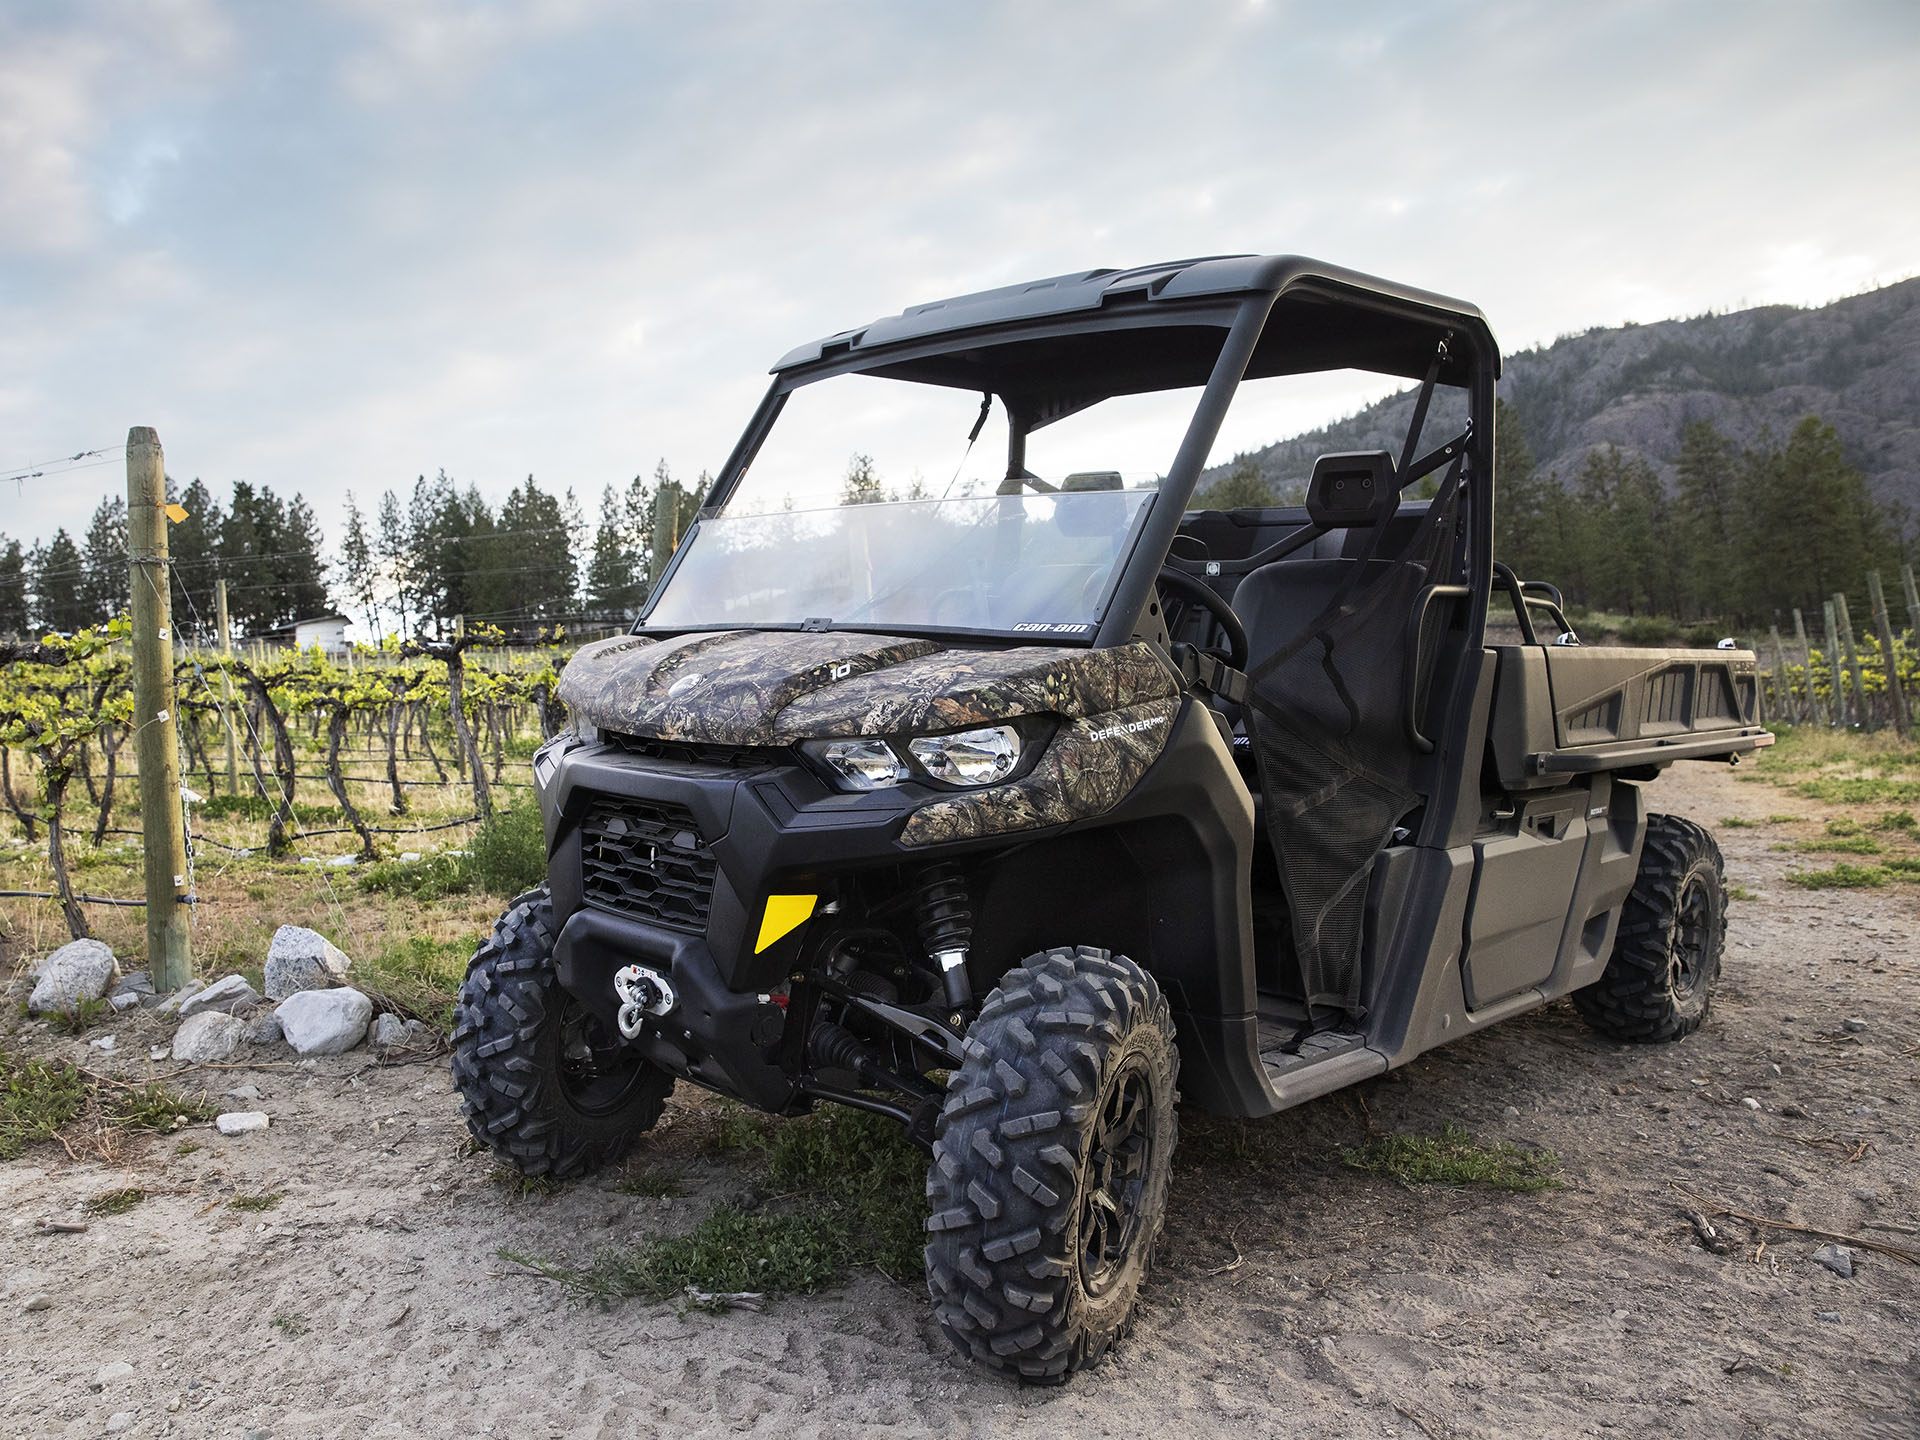 2022 Can-Am Defender Pro DPS HD10 in Island Park, Idaho - Photo 5